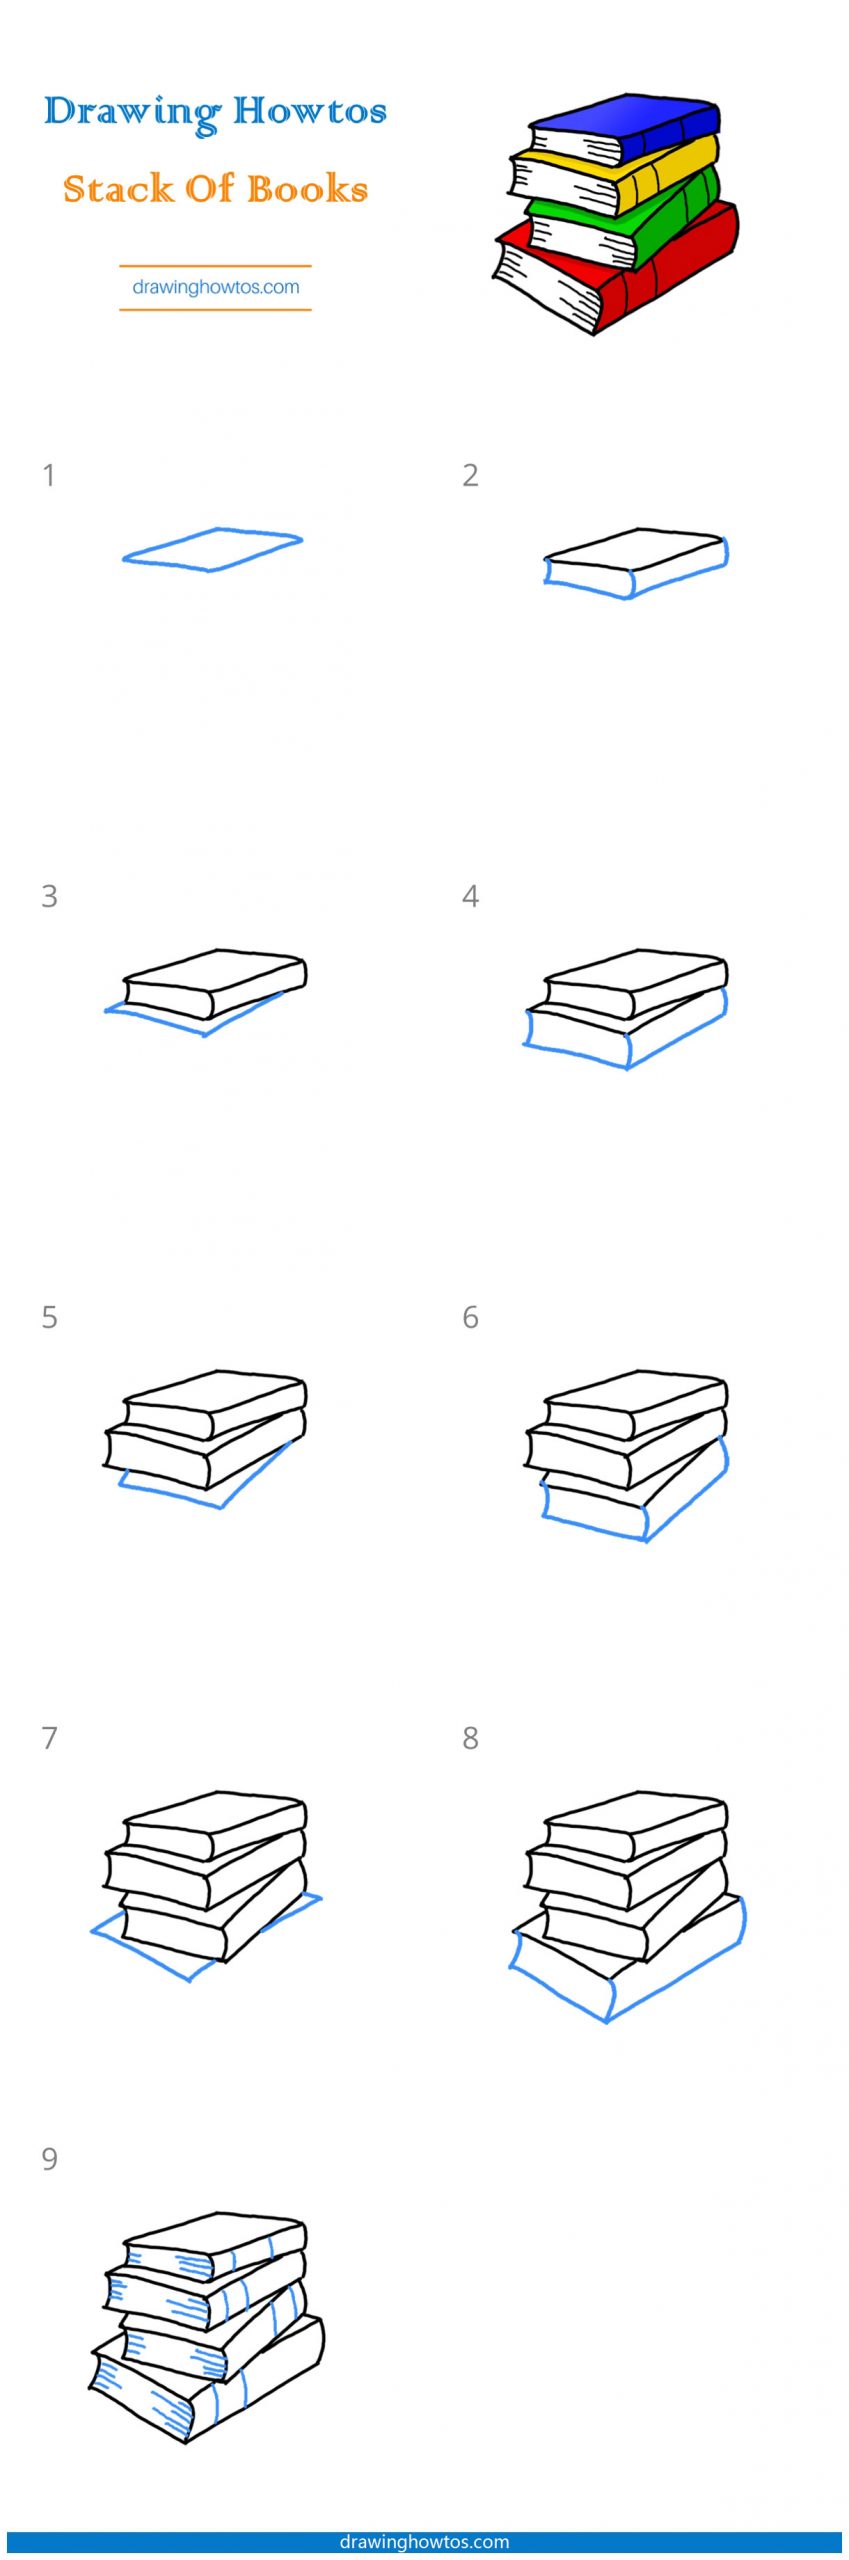 How To Draw A Stack Of Books – A Step by Step Guide